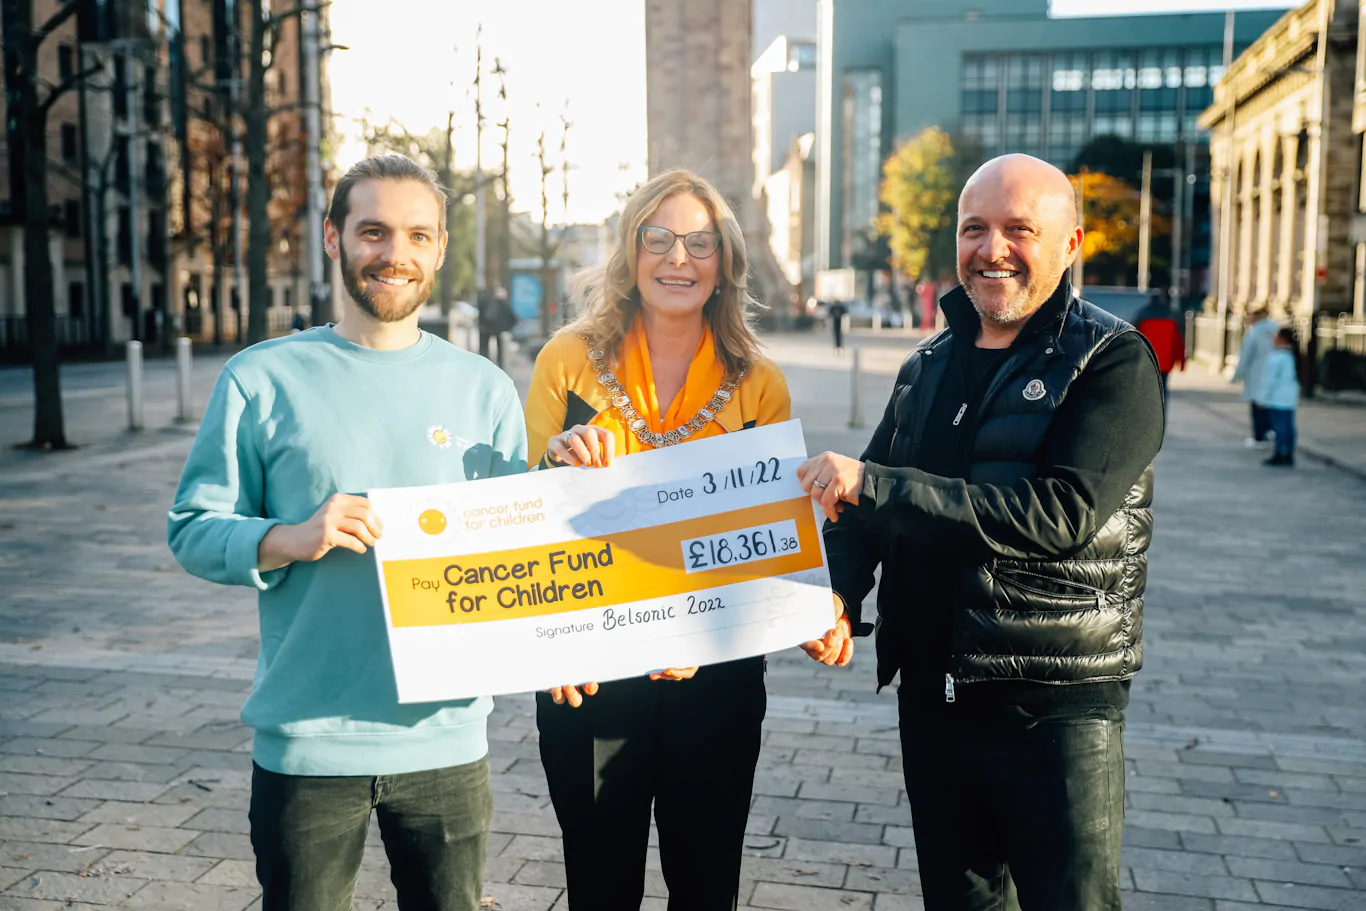 BELSONIC concerts raised more than £18,000 for Cancer Fund for Children